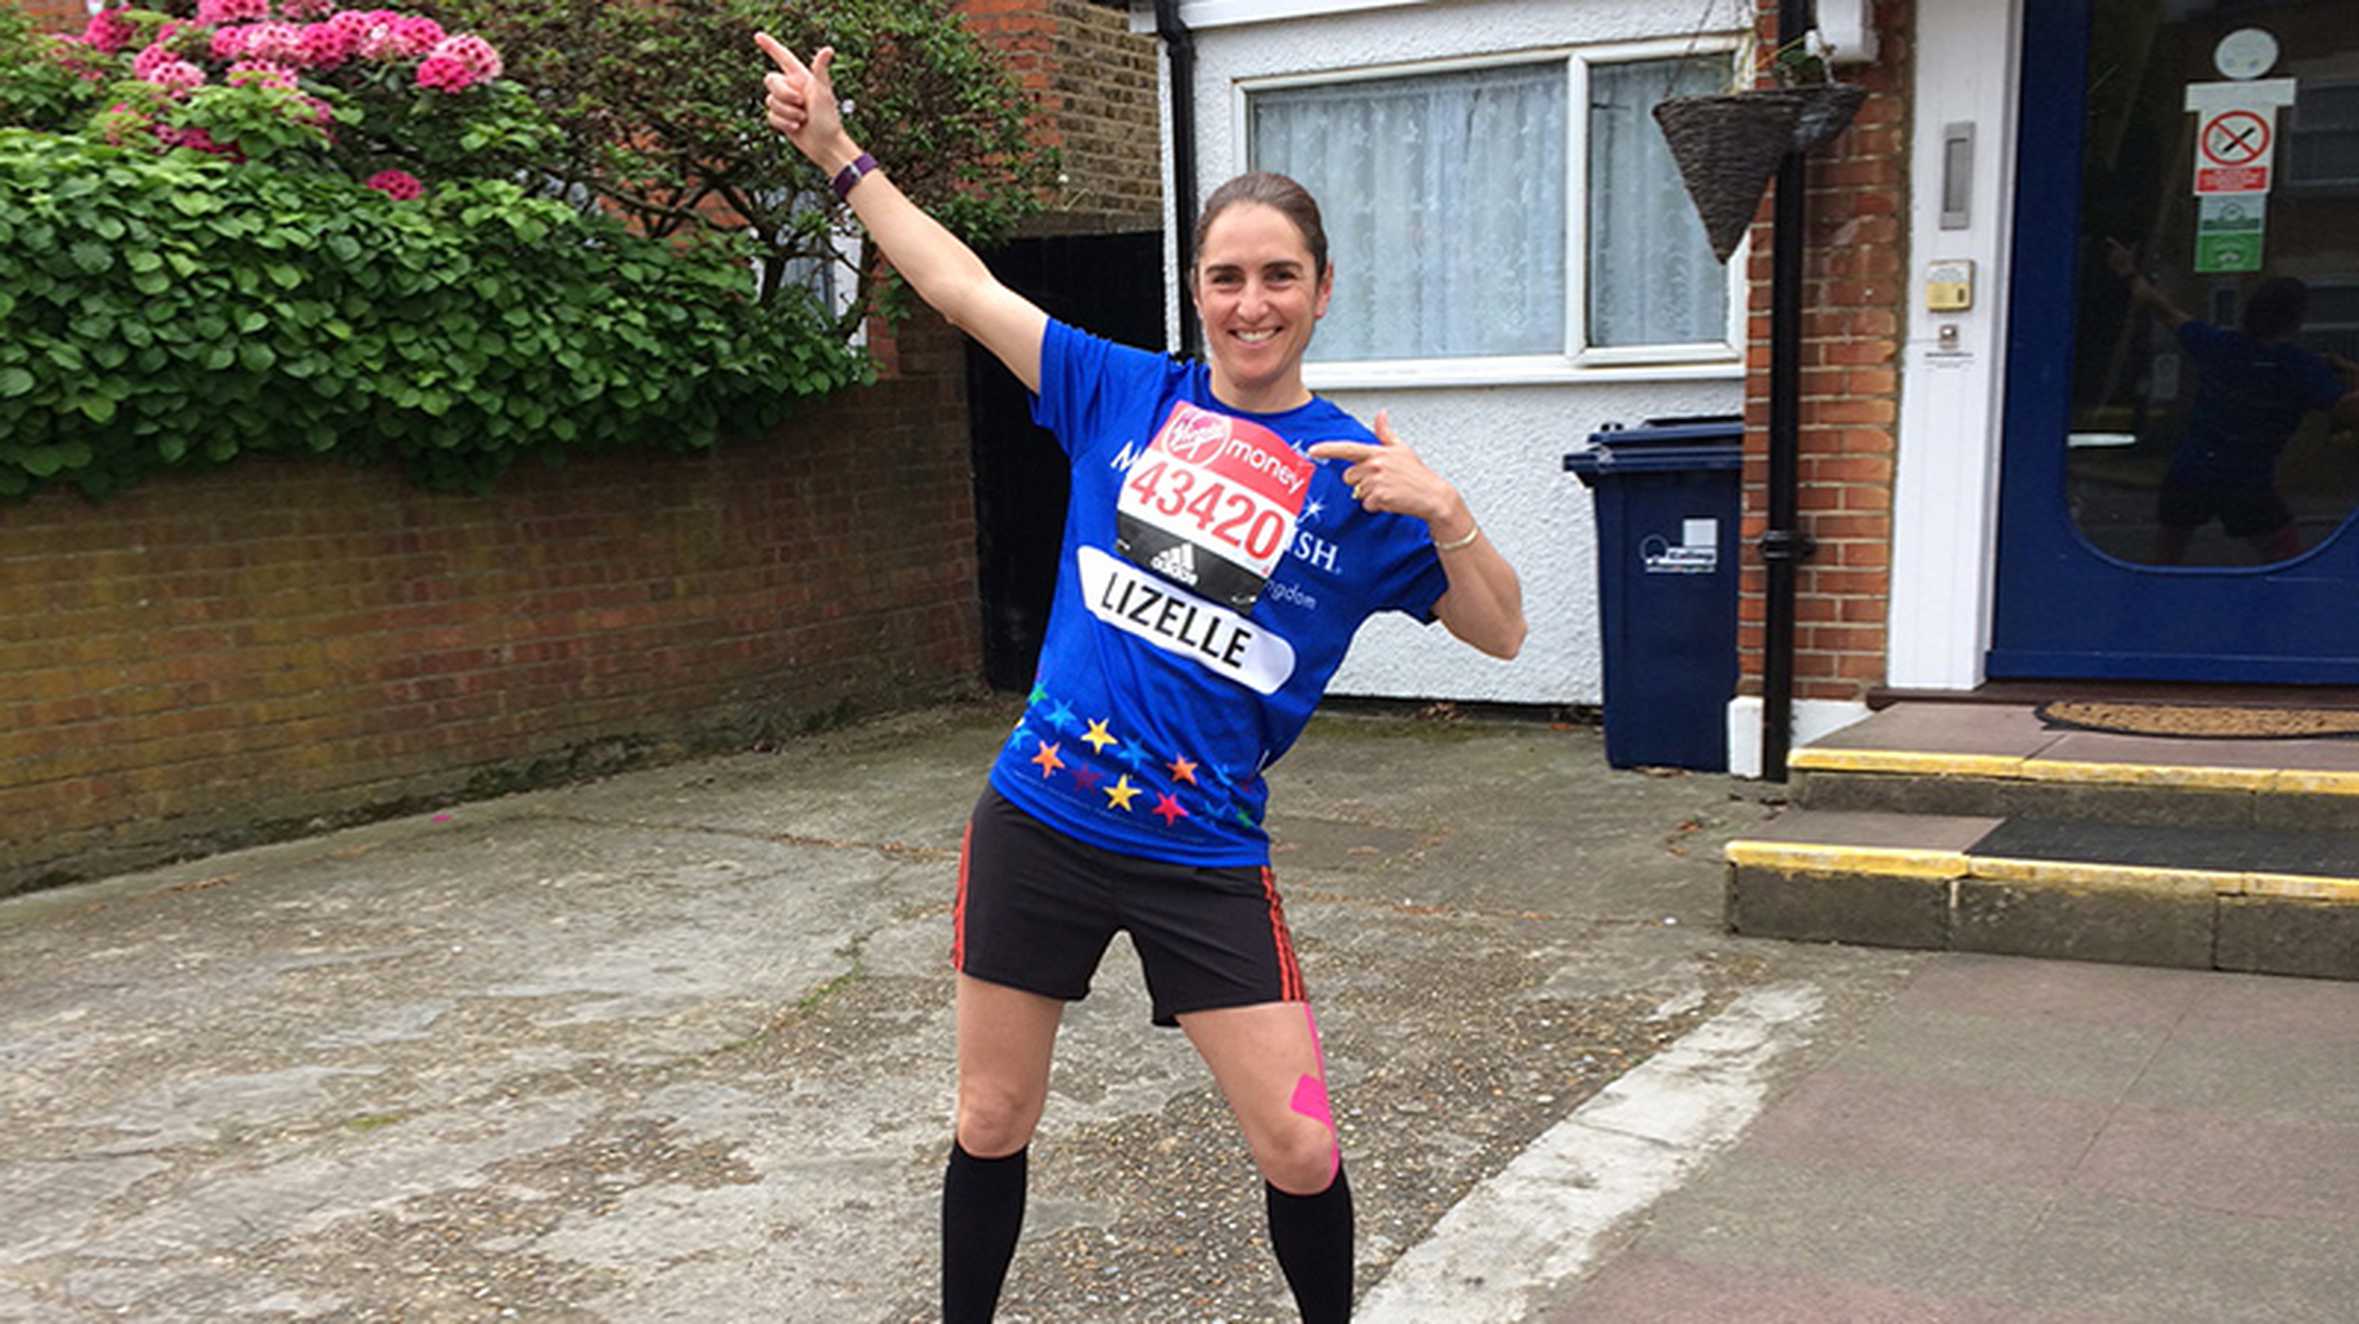 Lizelle outside her house in her running gear, ready to take on the London Marathon.